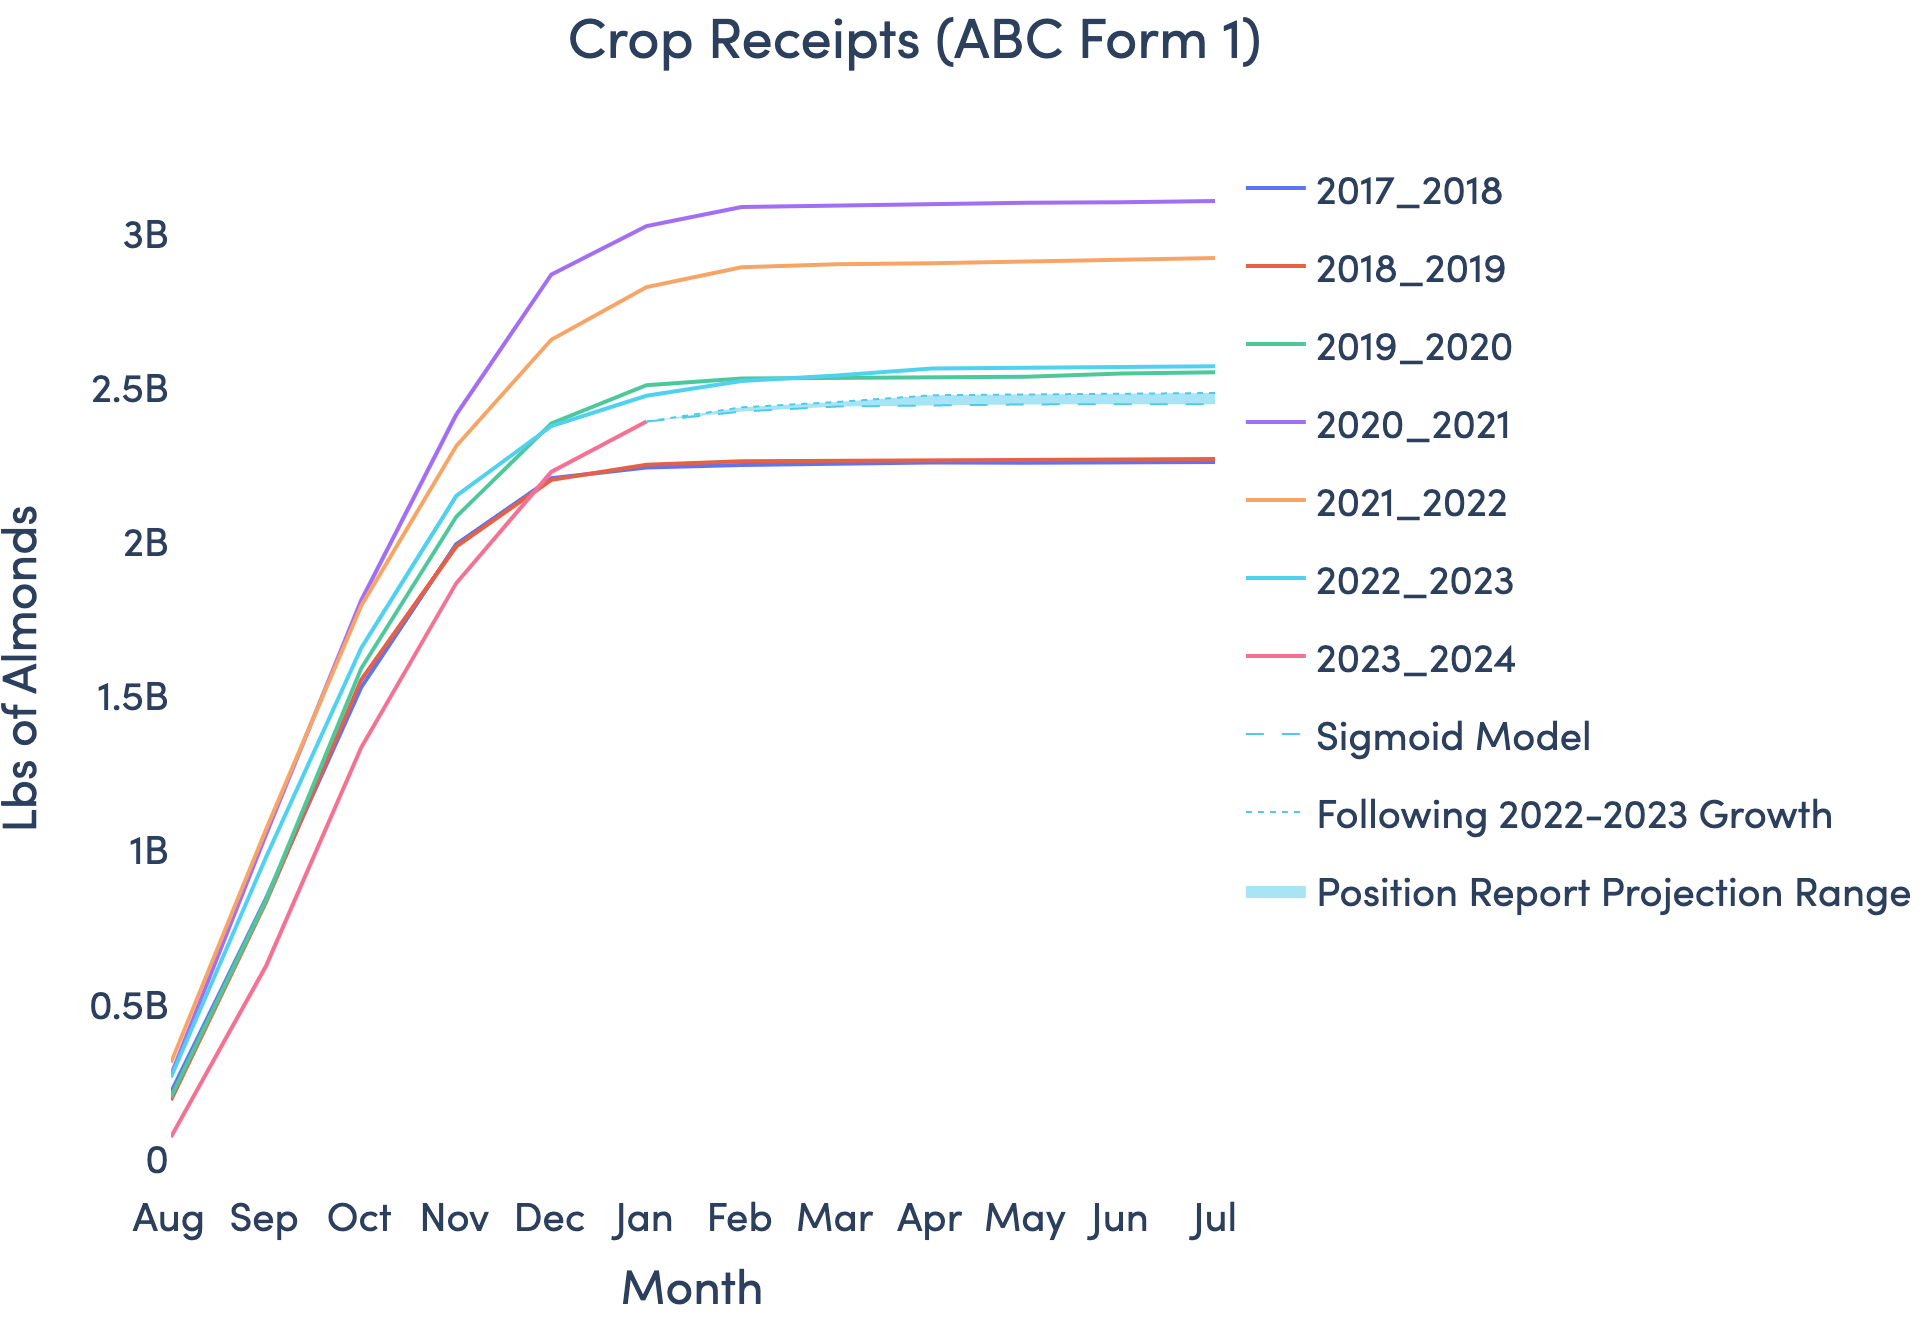 Bountiful Crop Receipt Projection as of January Position Report